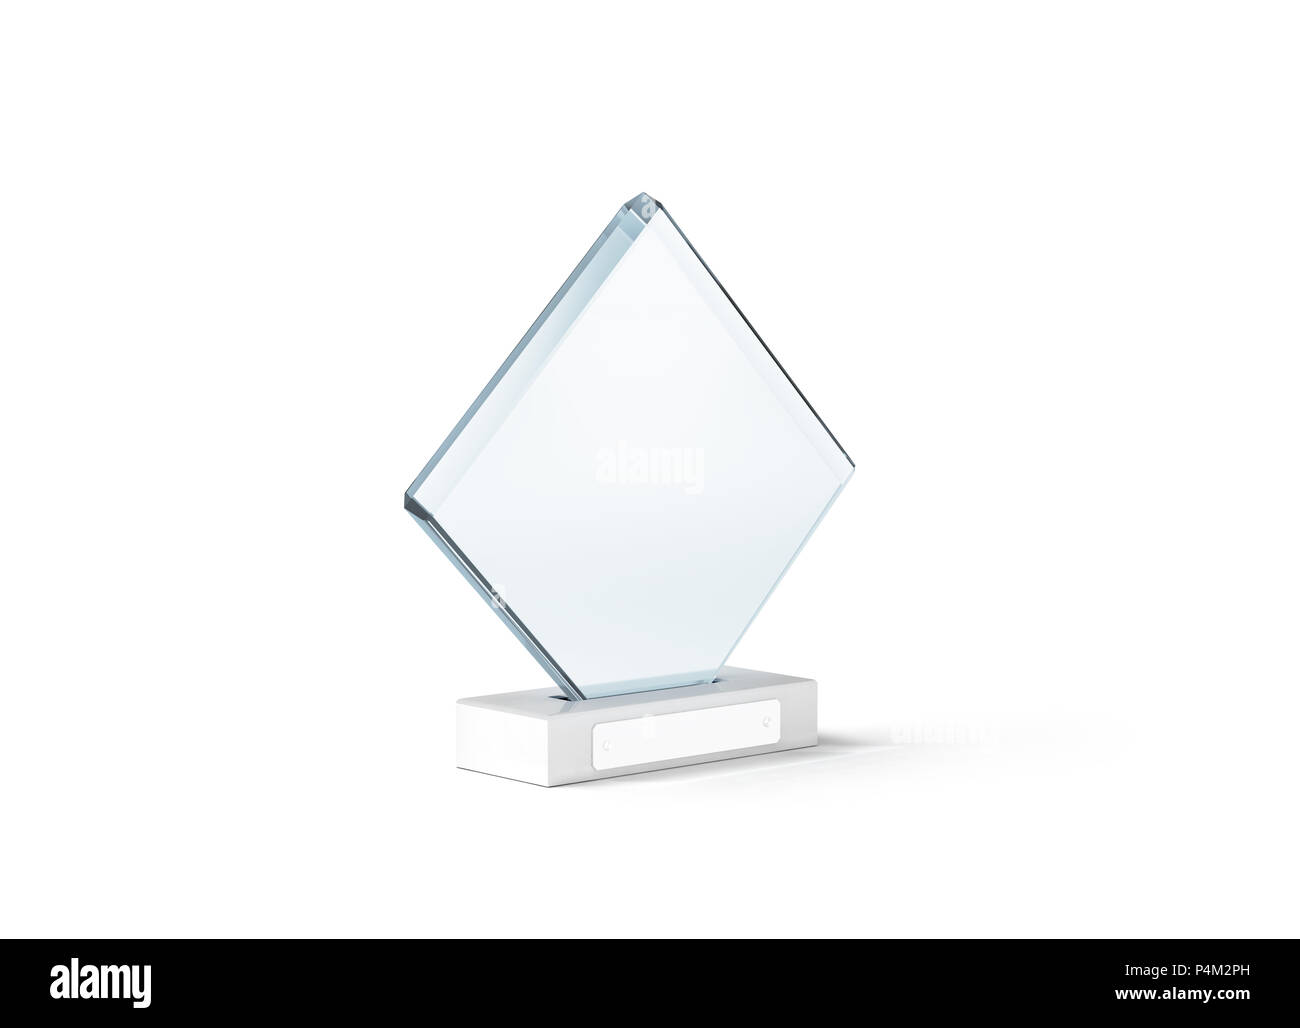 acrylic trophy stand